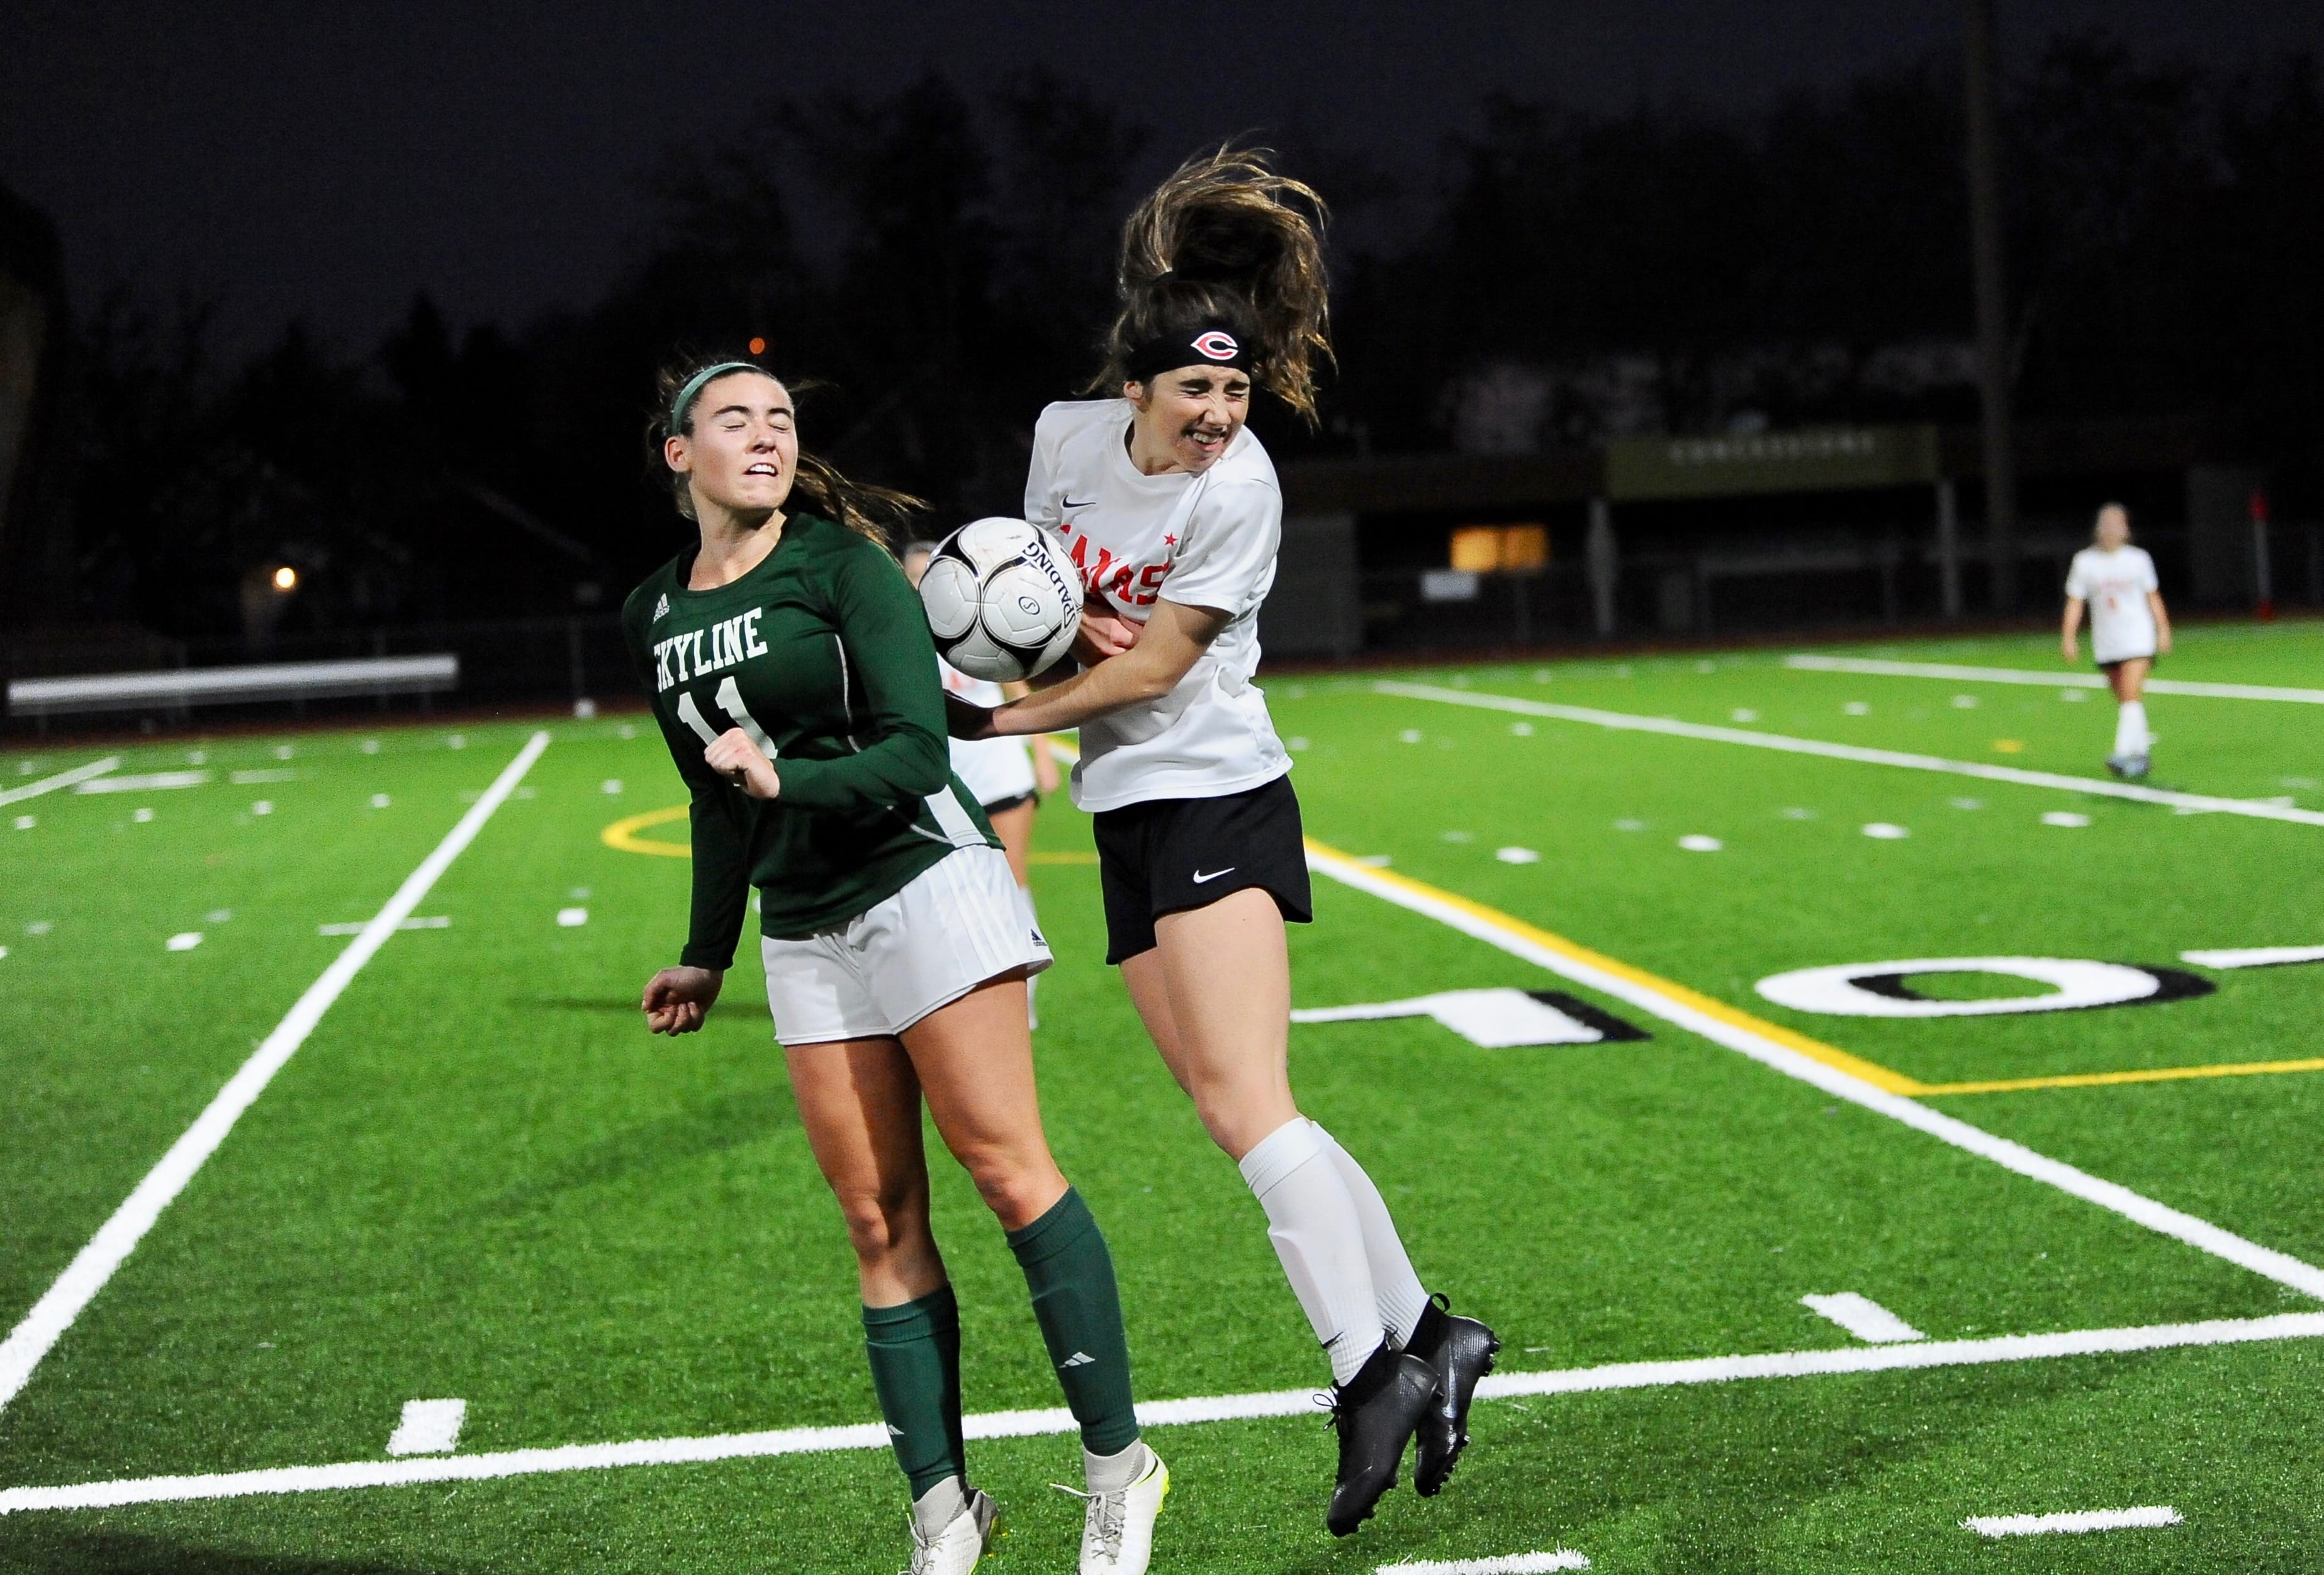 Camas sophomore defender Josephine Rein (right) fights for the ball with Skyline's Katelyn Reilly (left) in the Papermakers' 2-1 loss in the 4A state championship game at Sparks Stadium.